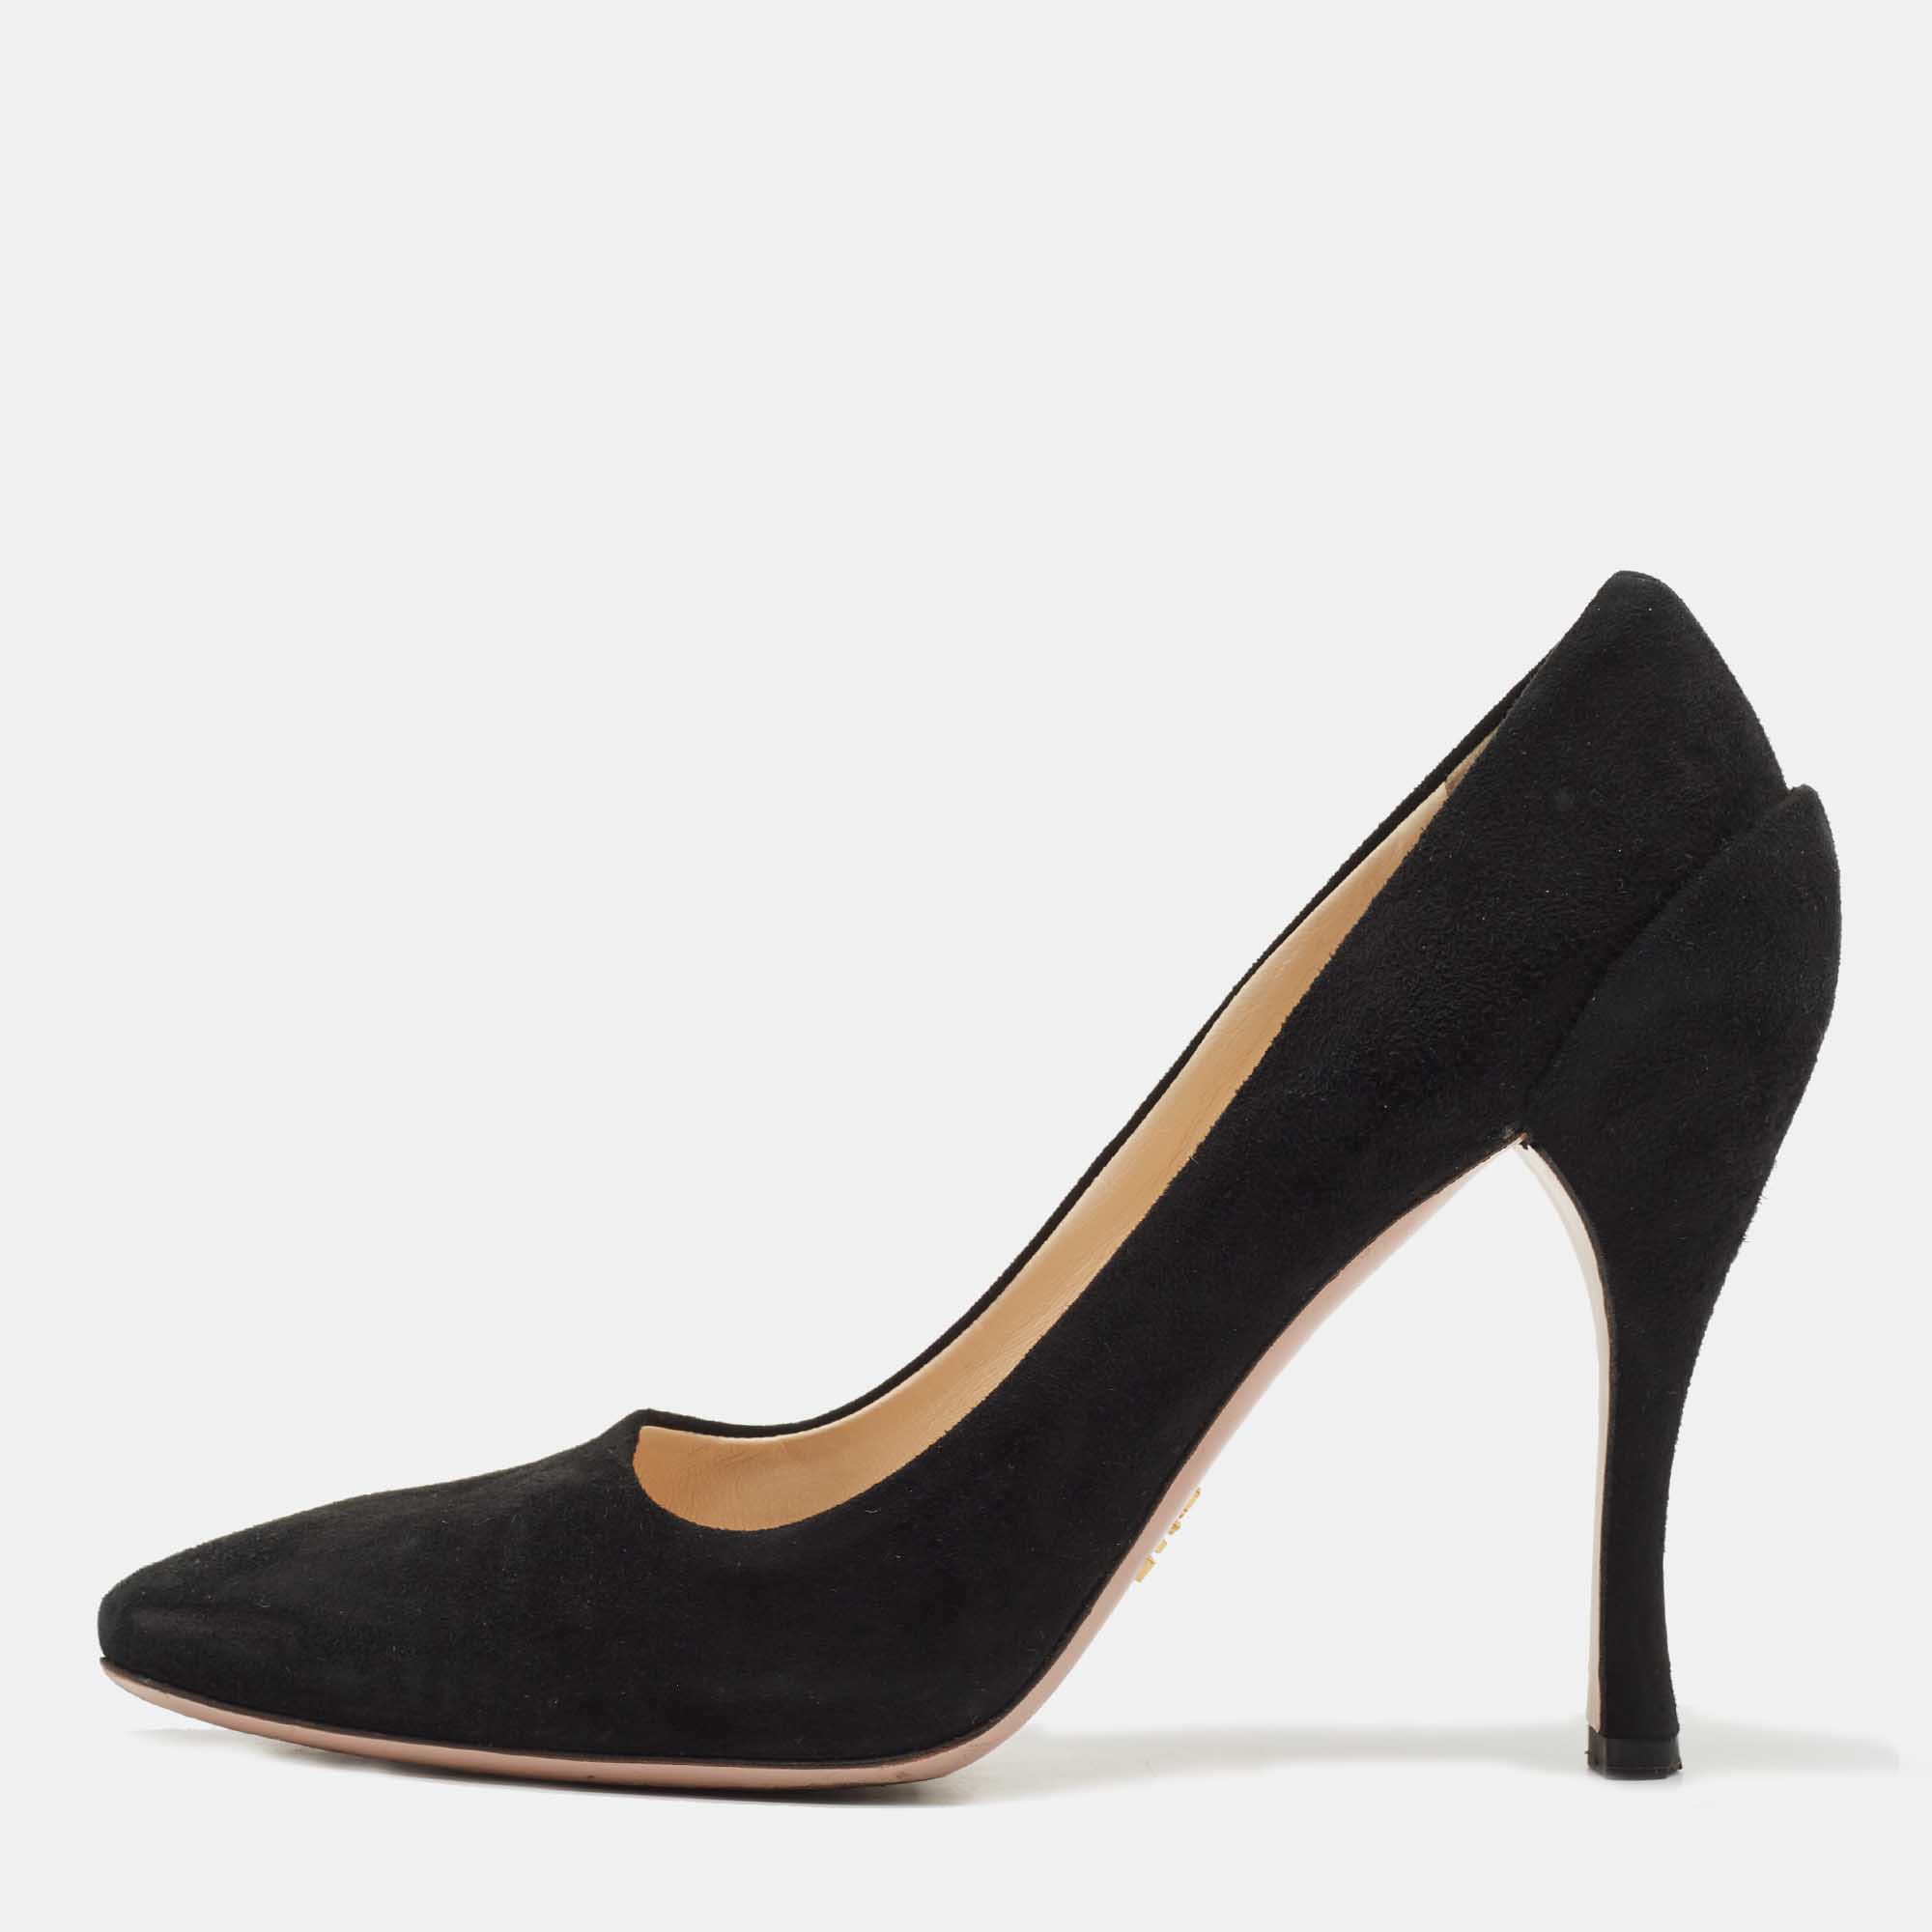 Pre-owned Prada Black Suede Pointed Toe Pumps Size 38.5